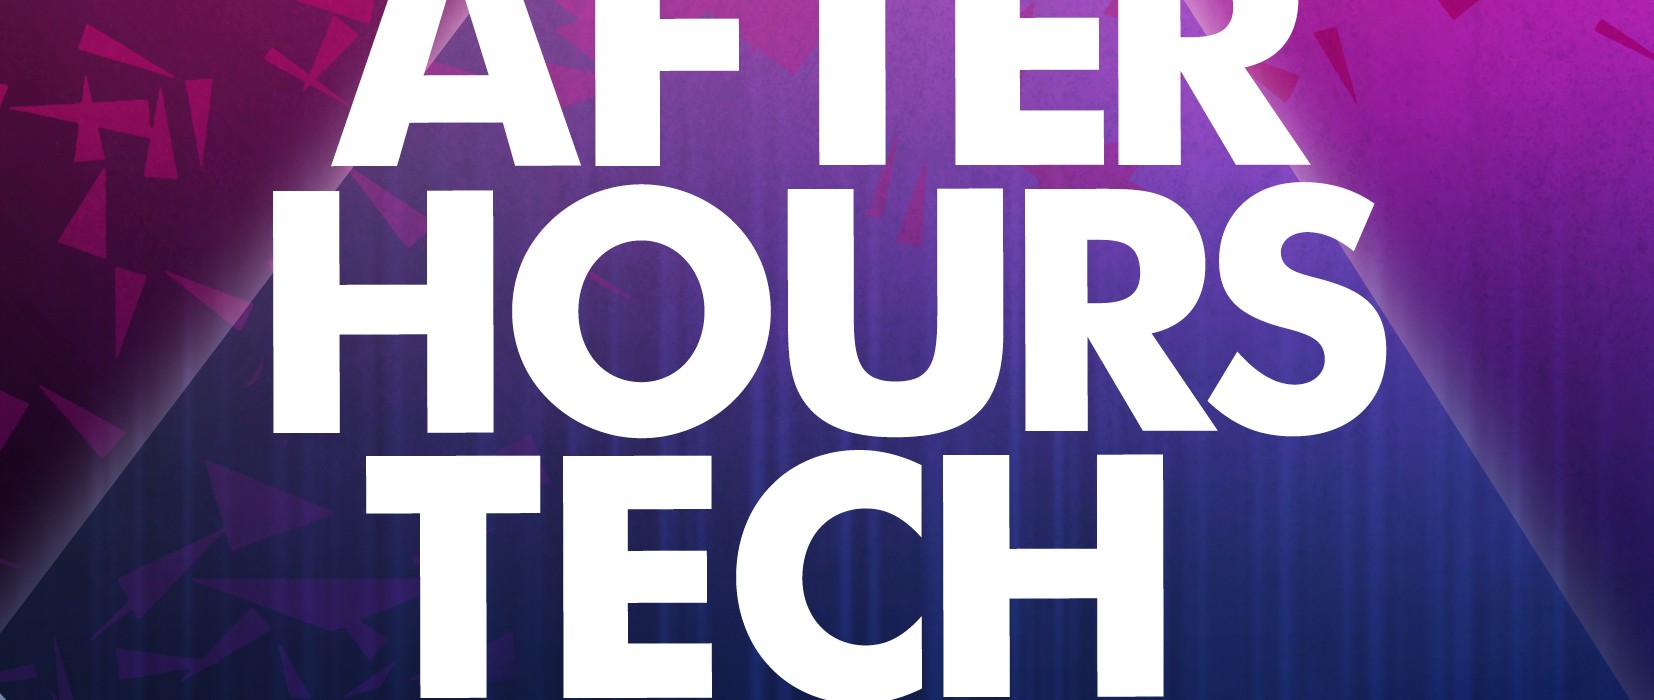 Afterhours Tech House – OUT NOW!!